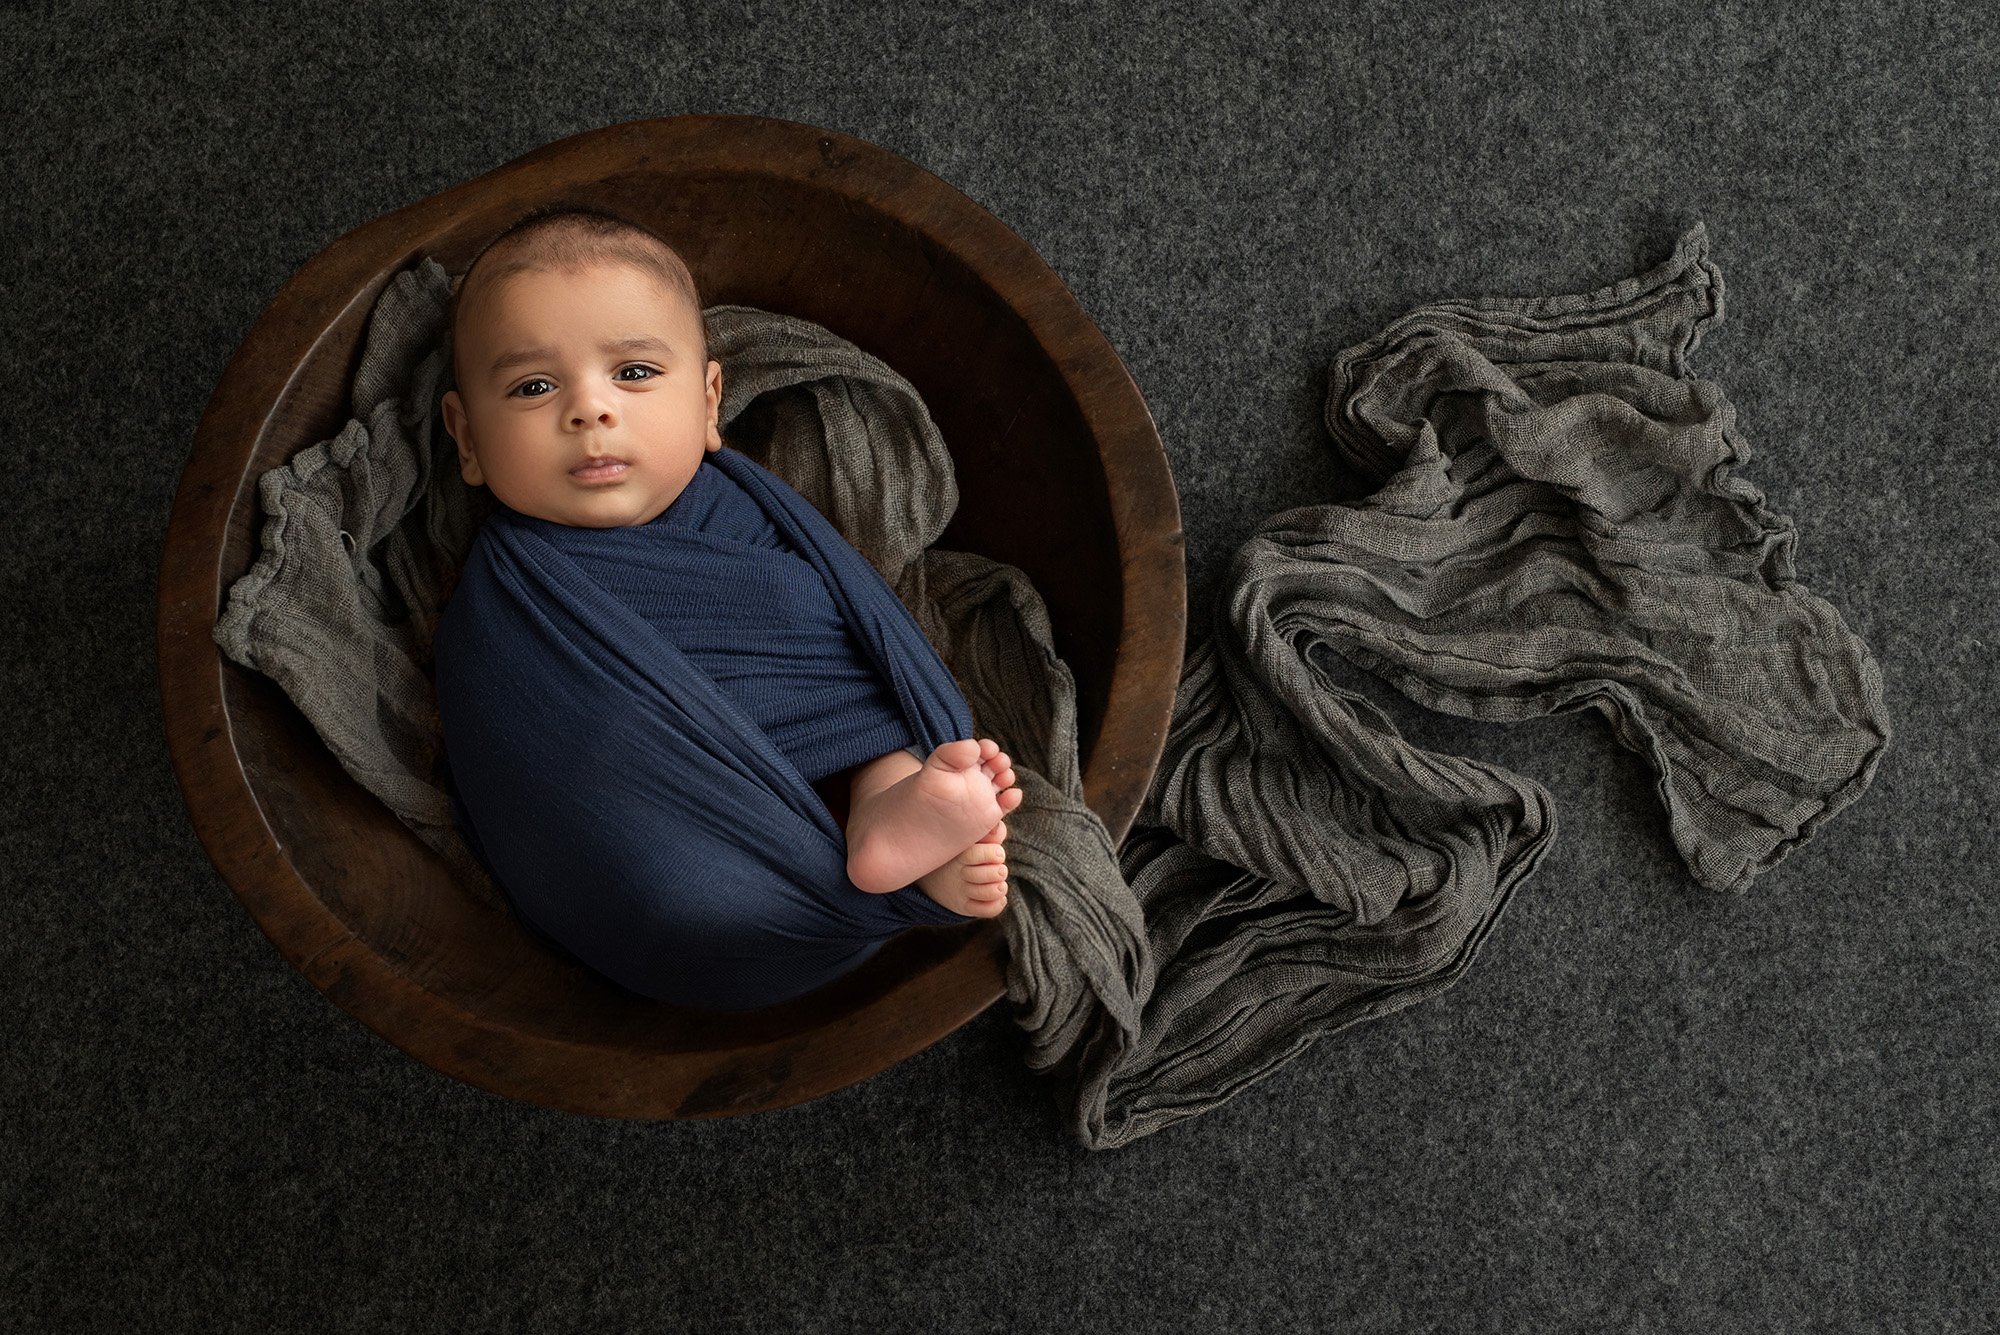 baby portraits newborn baby boy swaddled in blue laying on grey wrap inside wooden bowl